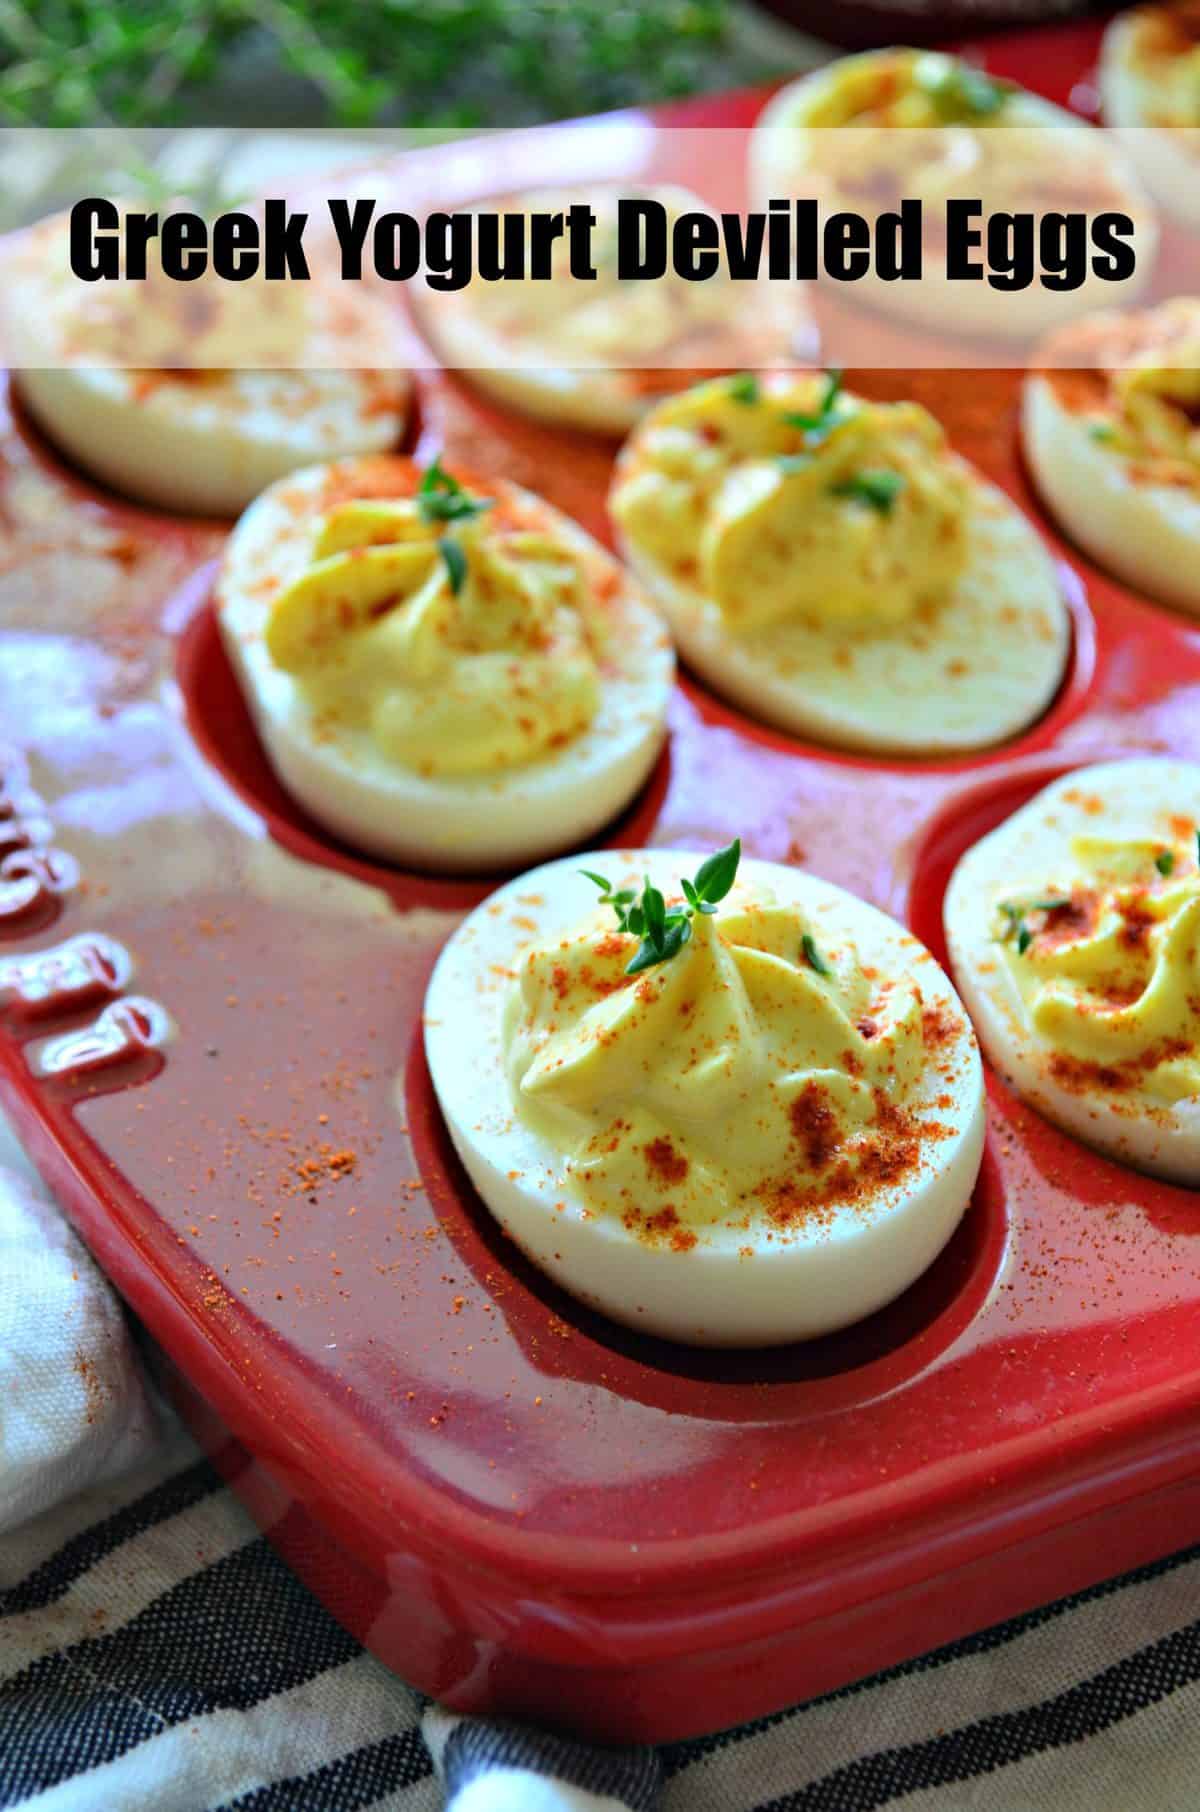 closeup top view of deviled eggs sprinkled with paprika in red egg holder with title text.